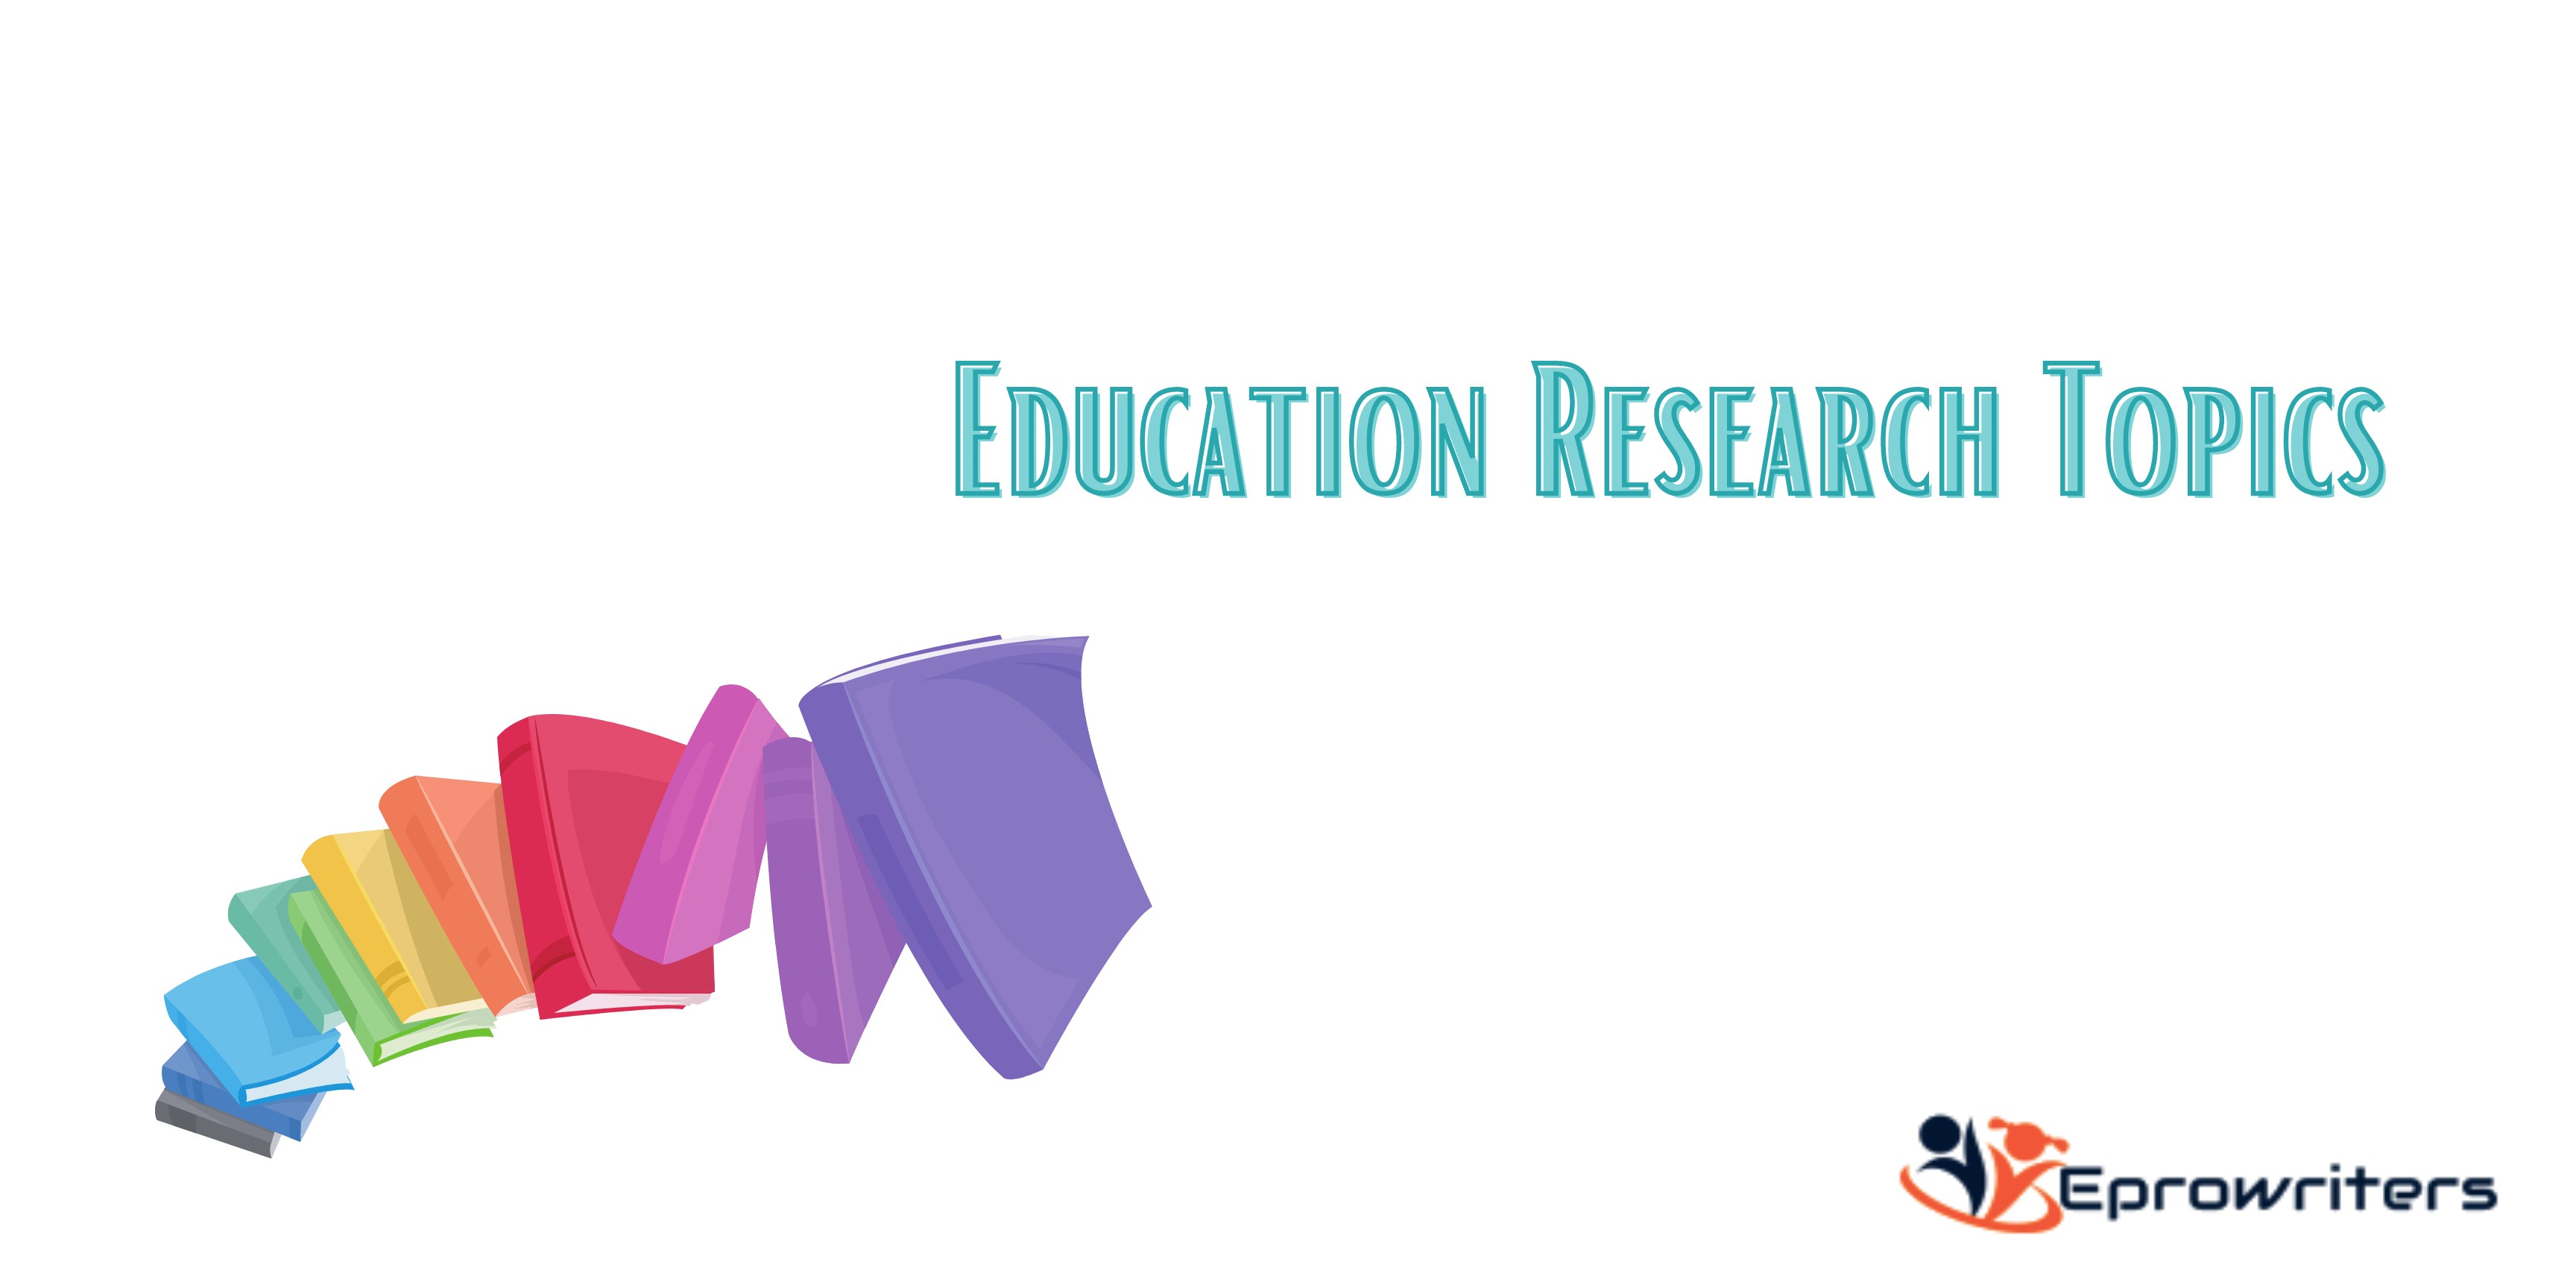 150+ Topics & Ideas for Education Research in 2023